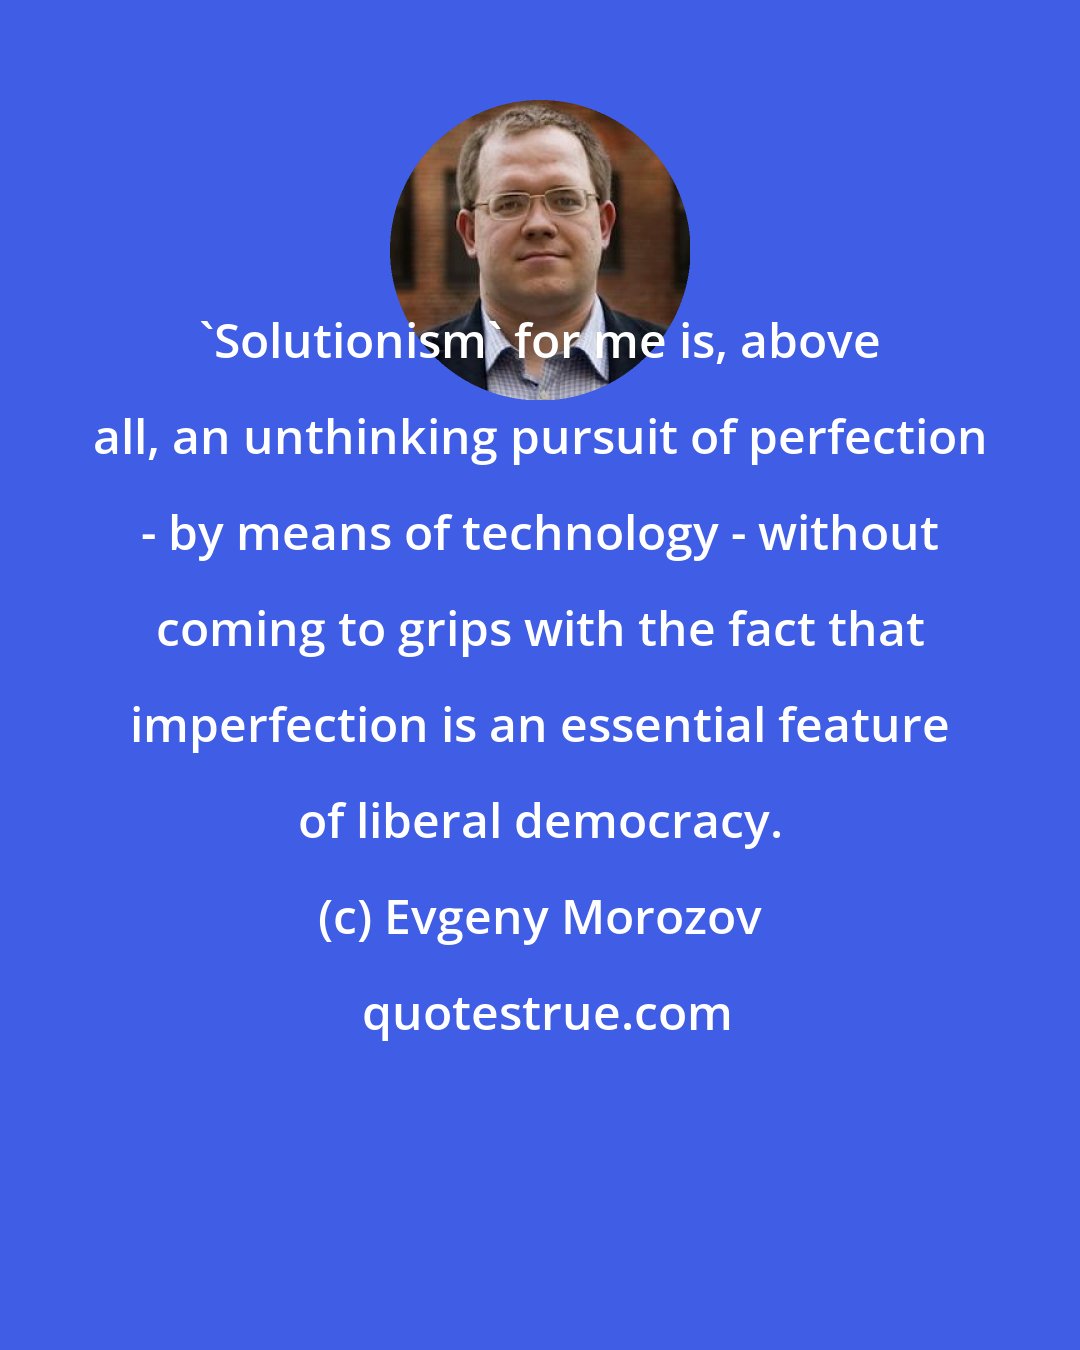 Evgeny Morozov: 'Solutionism' for me is, above all, an unthinking pursuit of perfection - by means of technology - without coming to grips with the fact that imperfection is an essential feature of liberal democracy.